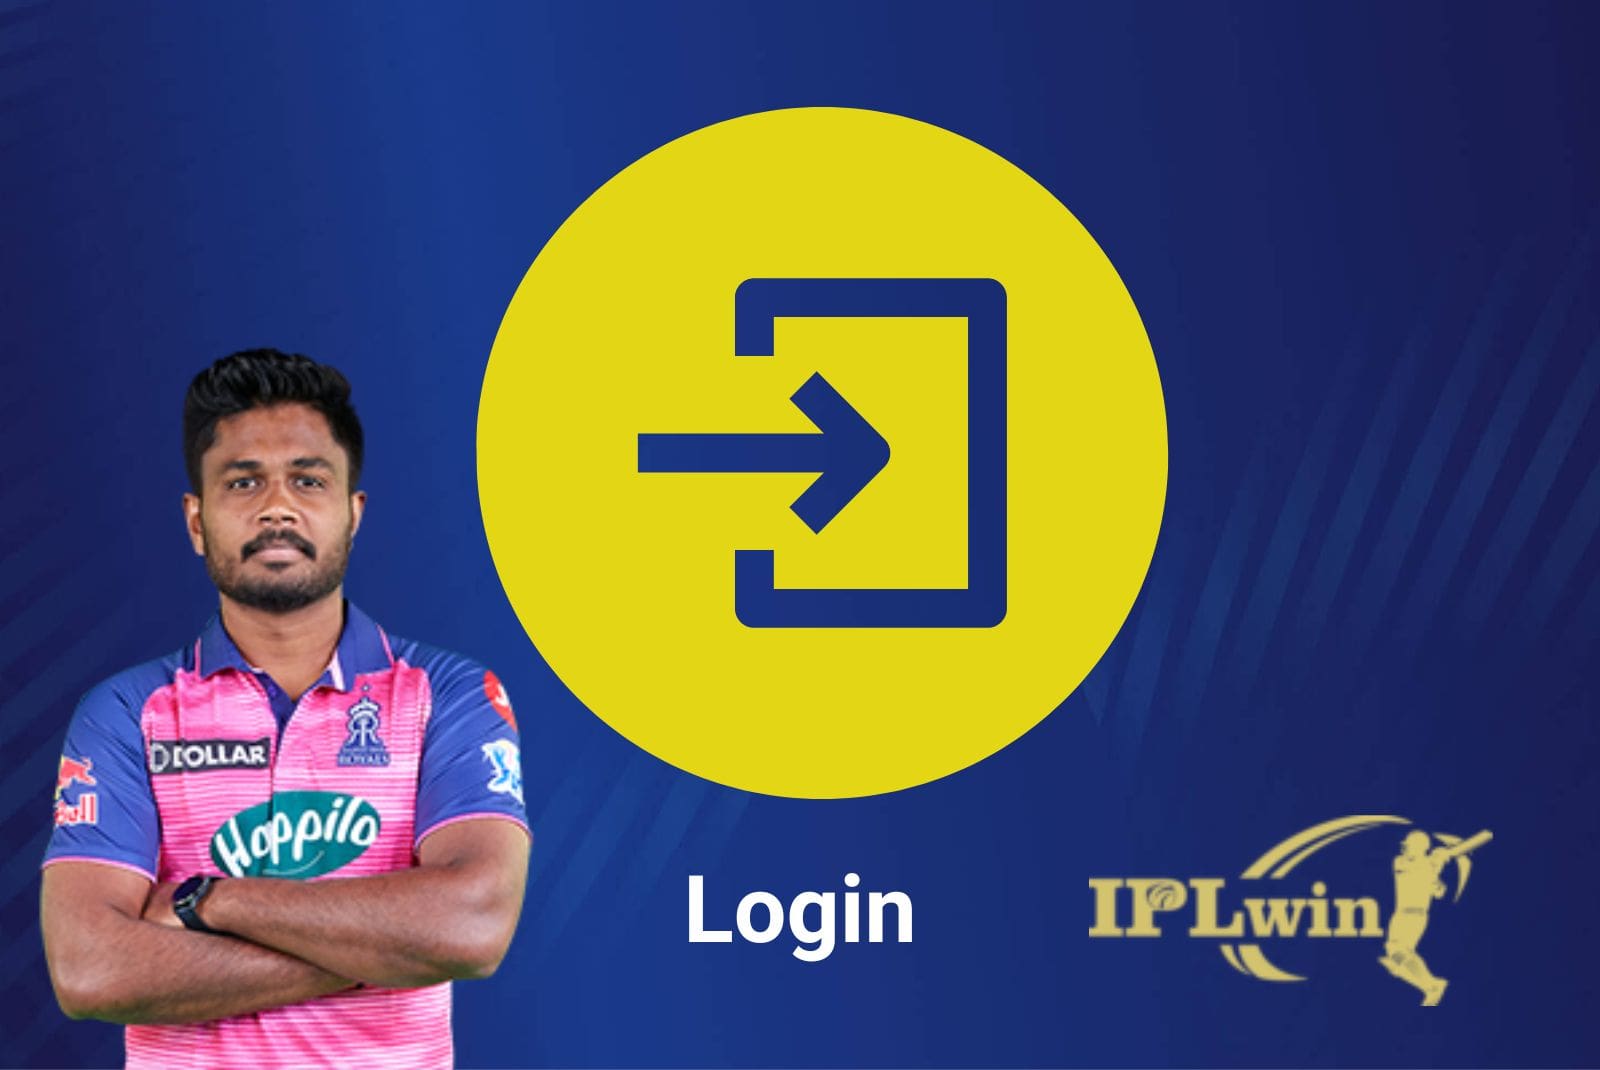 How to login at IPLwin India official website